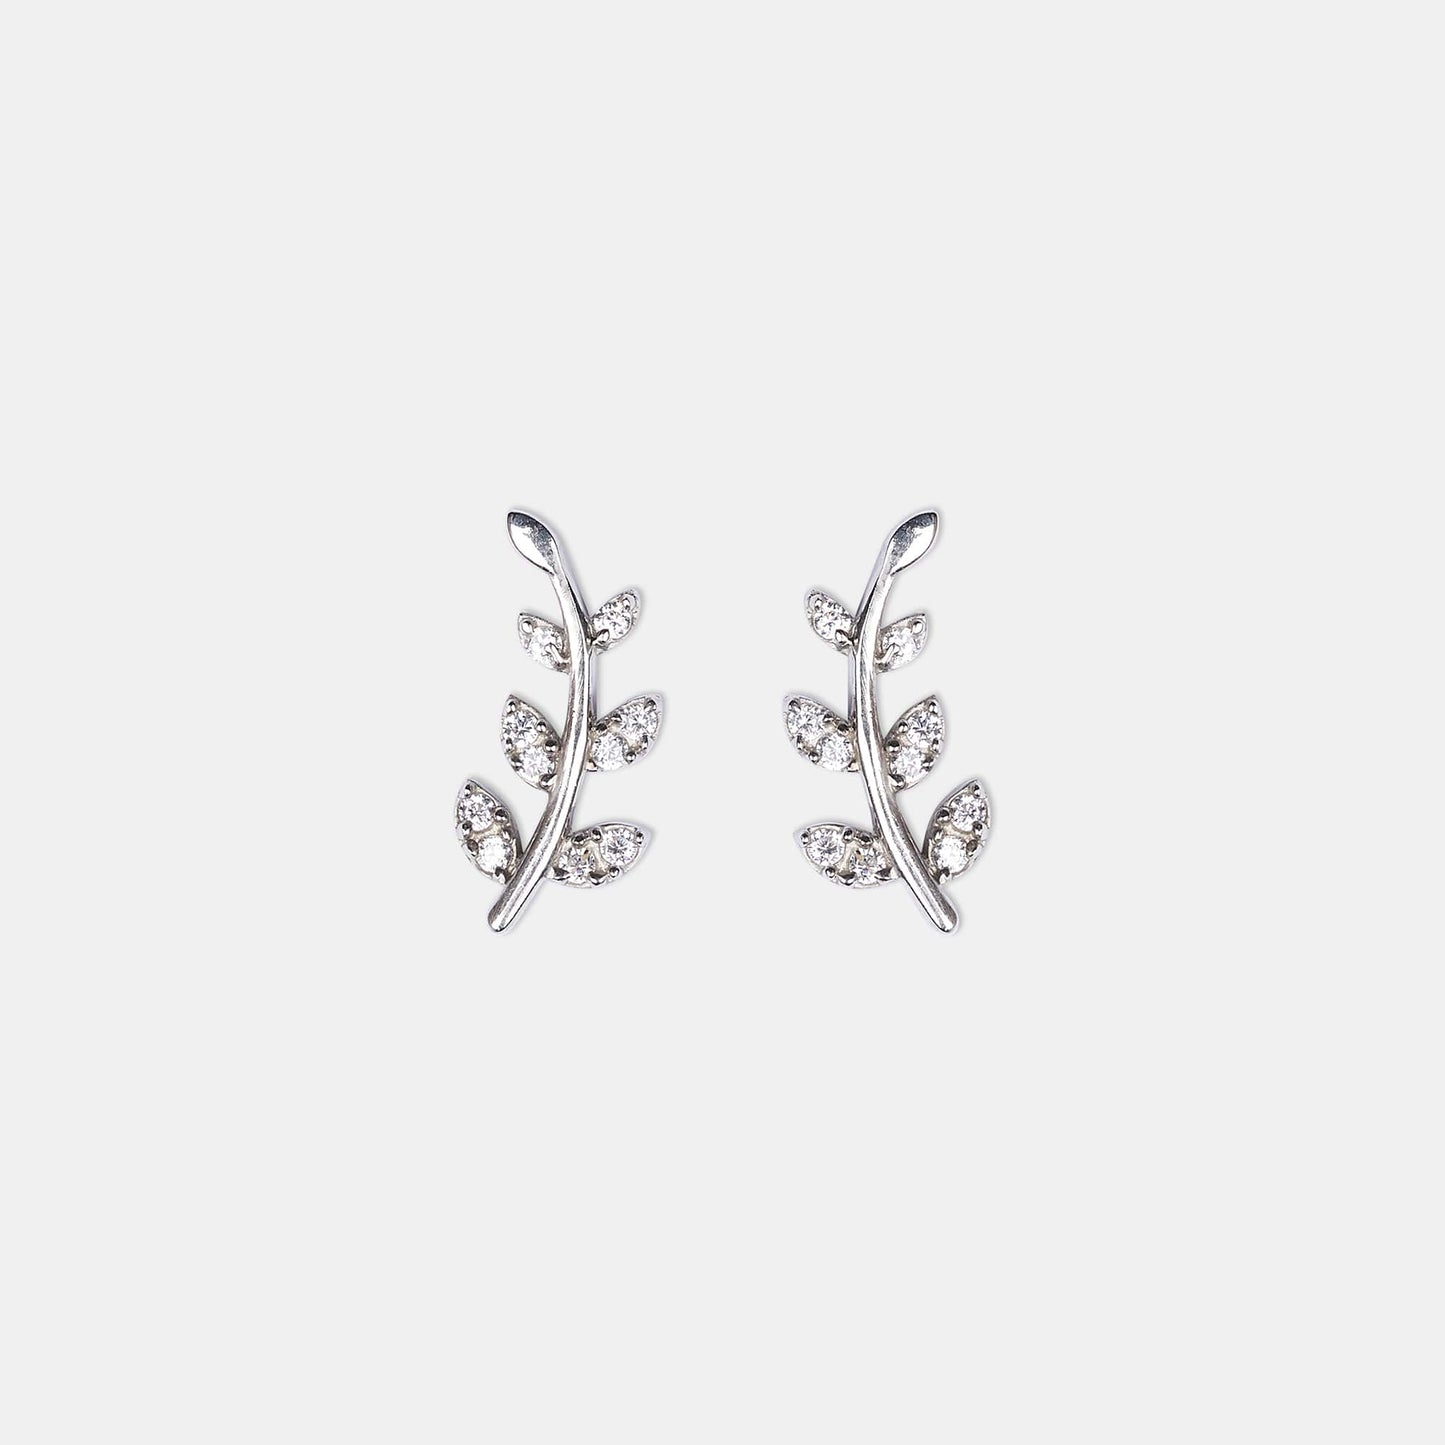 Elevate your style with NaturaLeaf's stunning and sophisticated Elegance Earrings.